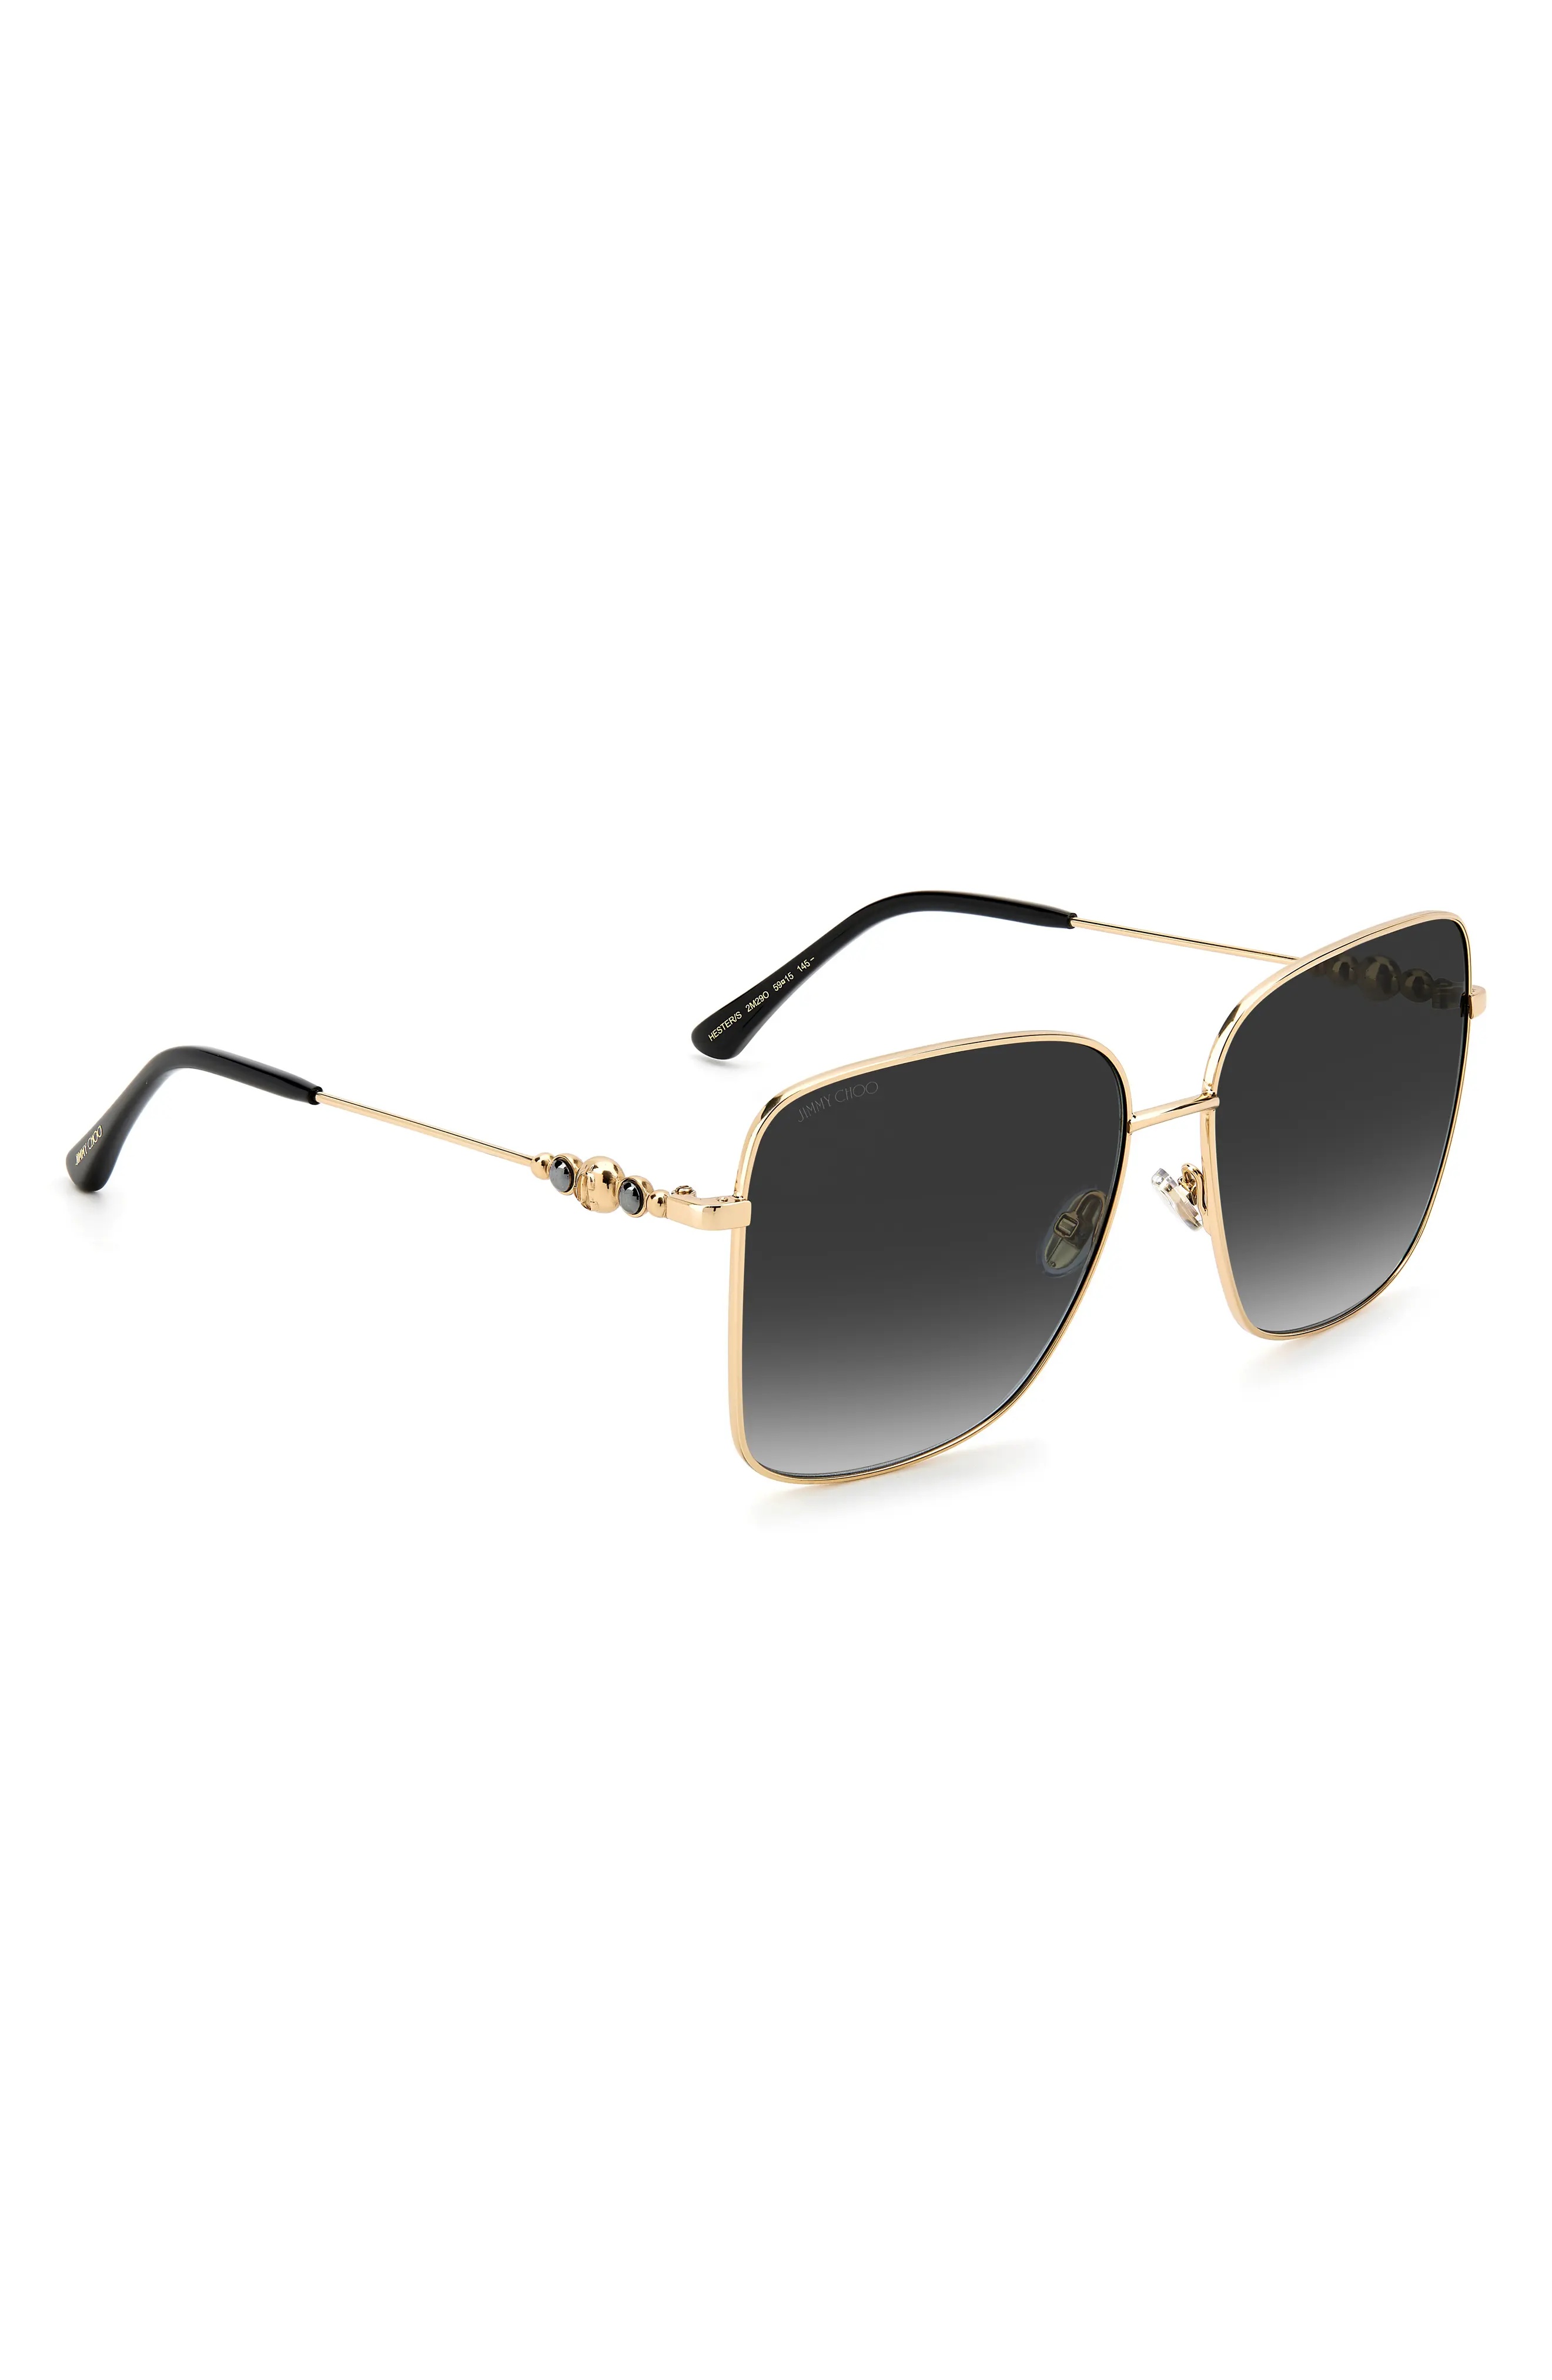 Hesters 59mm Gradient Square Sunglasses in Black Gold /Grey Shaded - 4